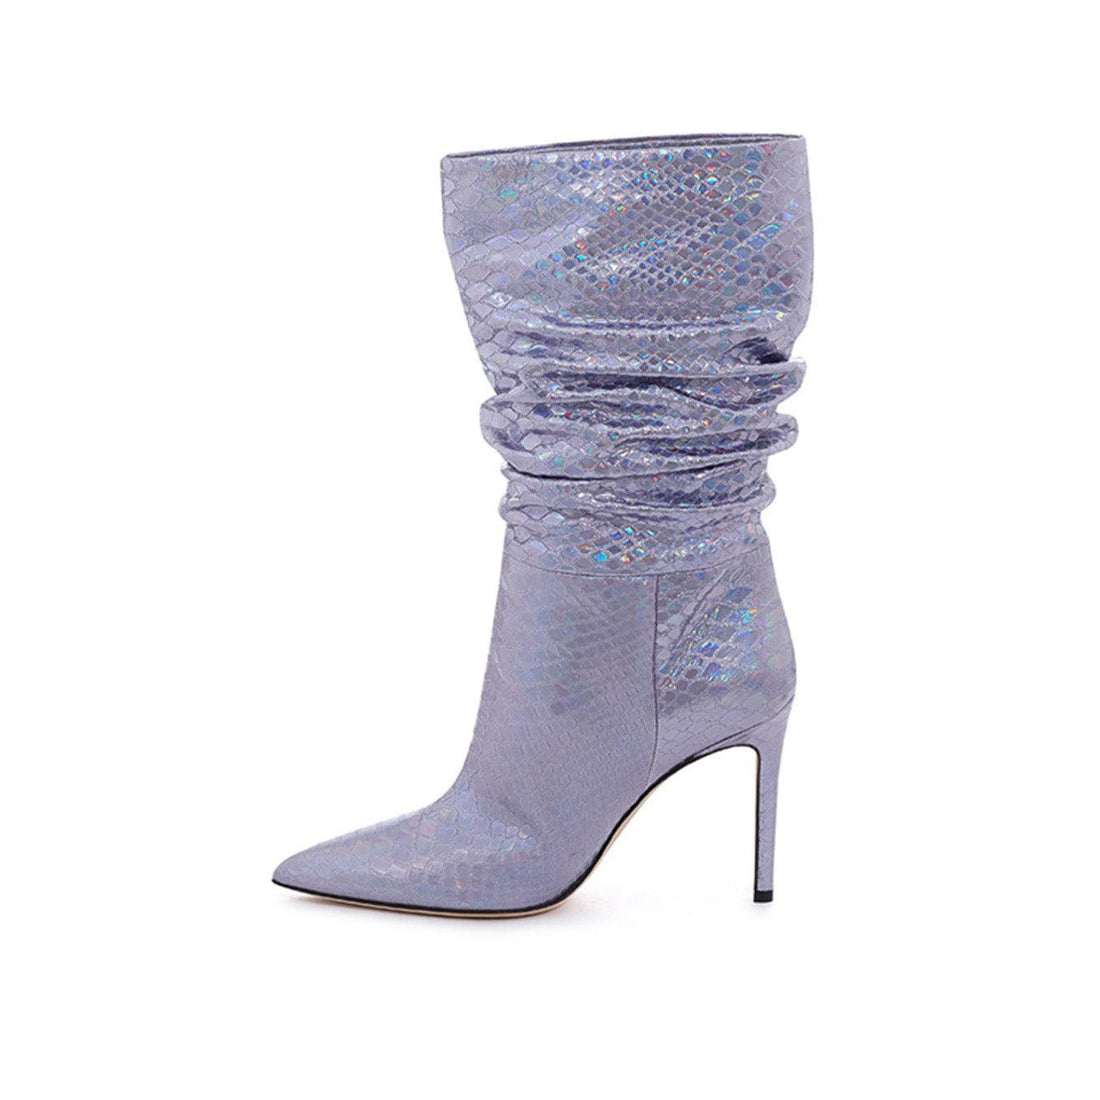 Paris Texas Lilac Reptile Print Leather Ankle Boot